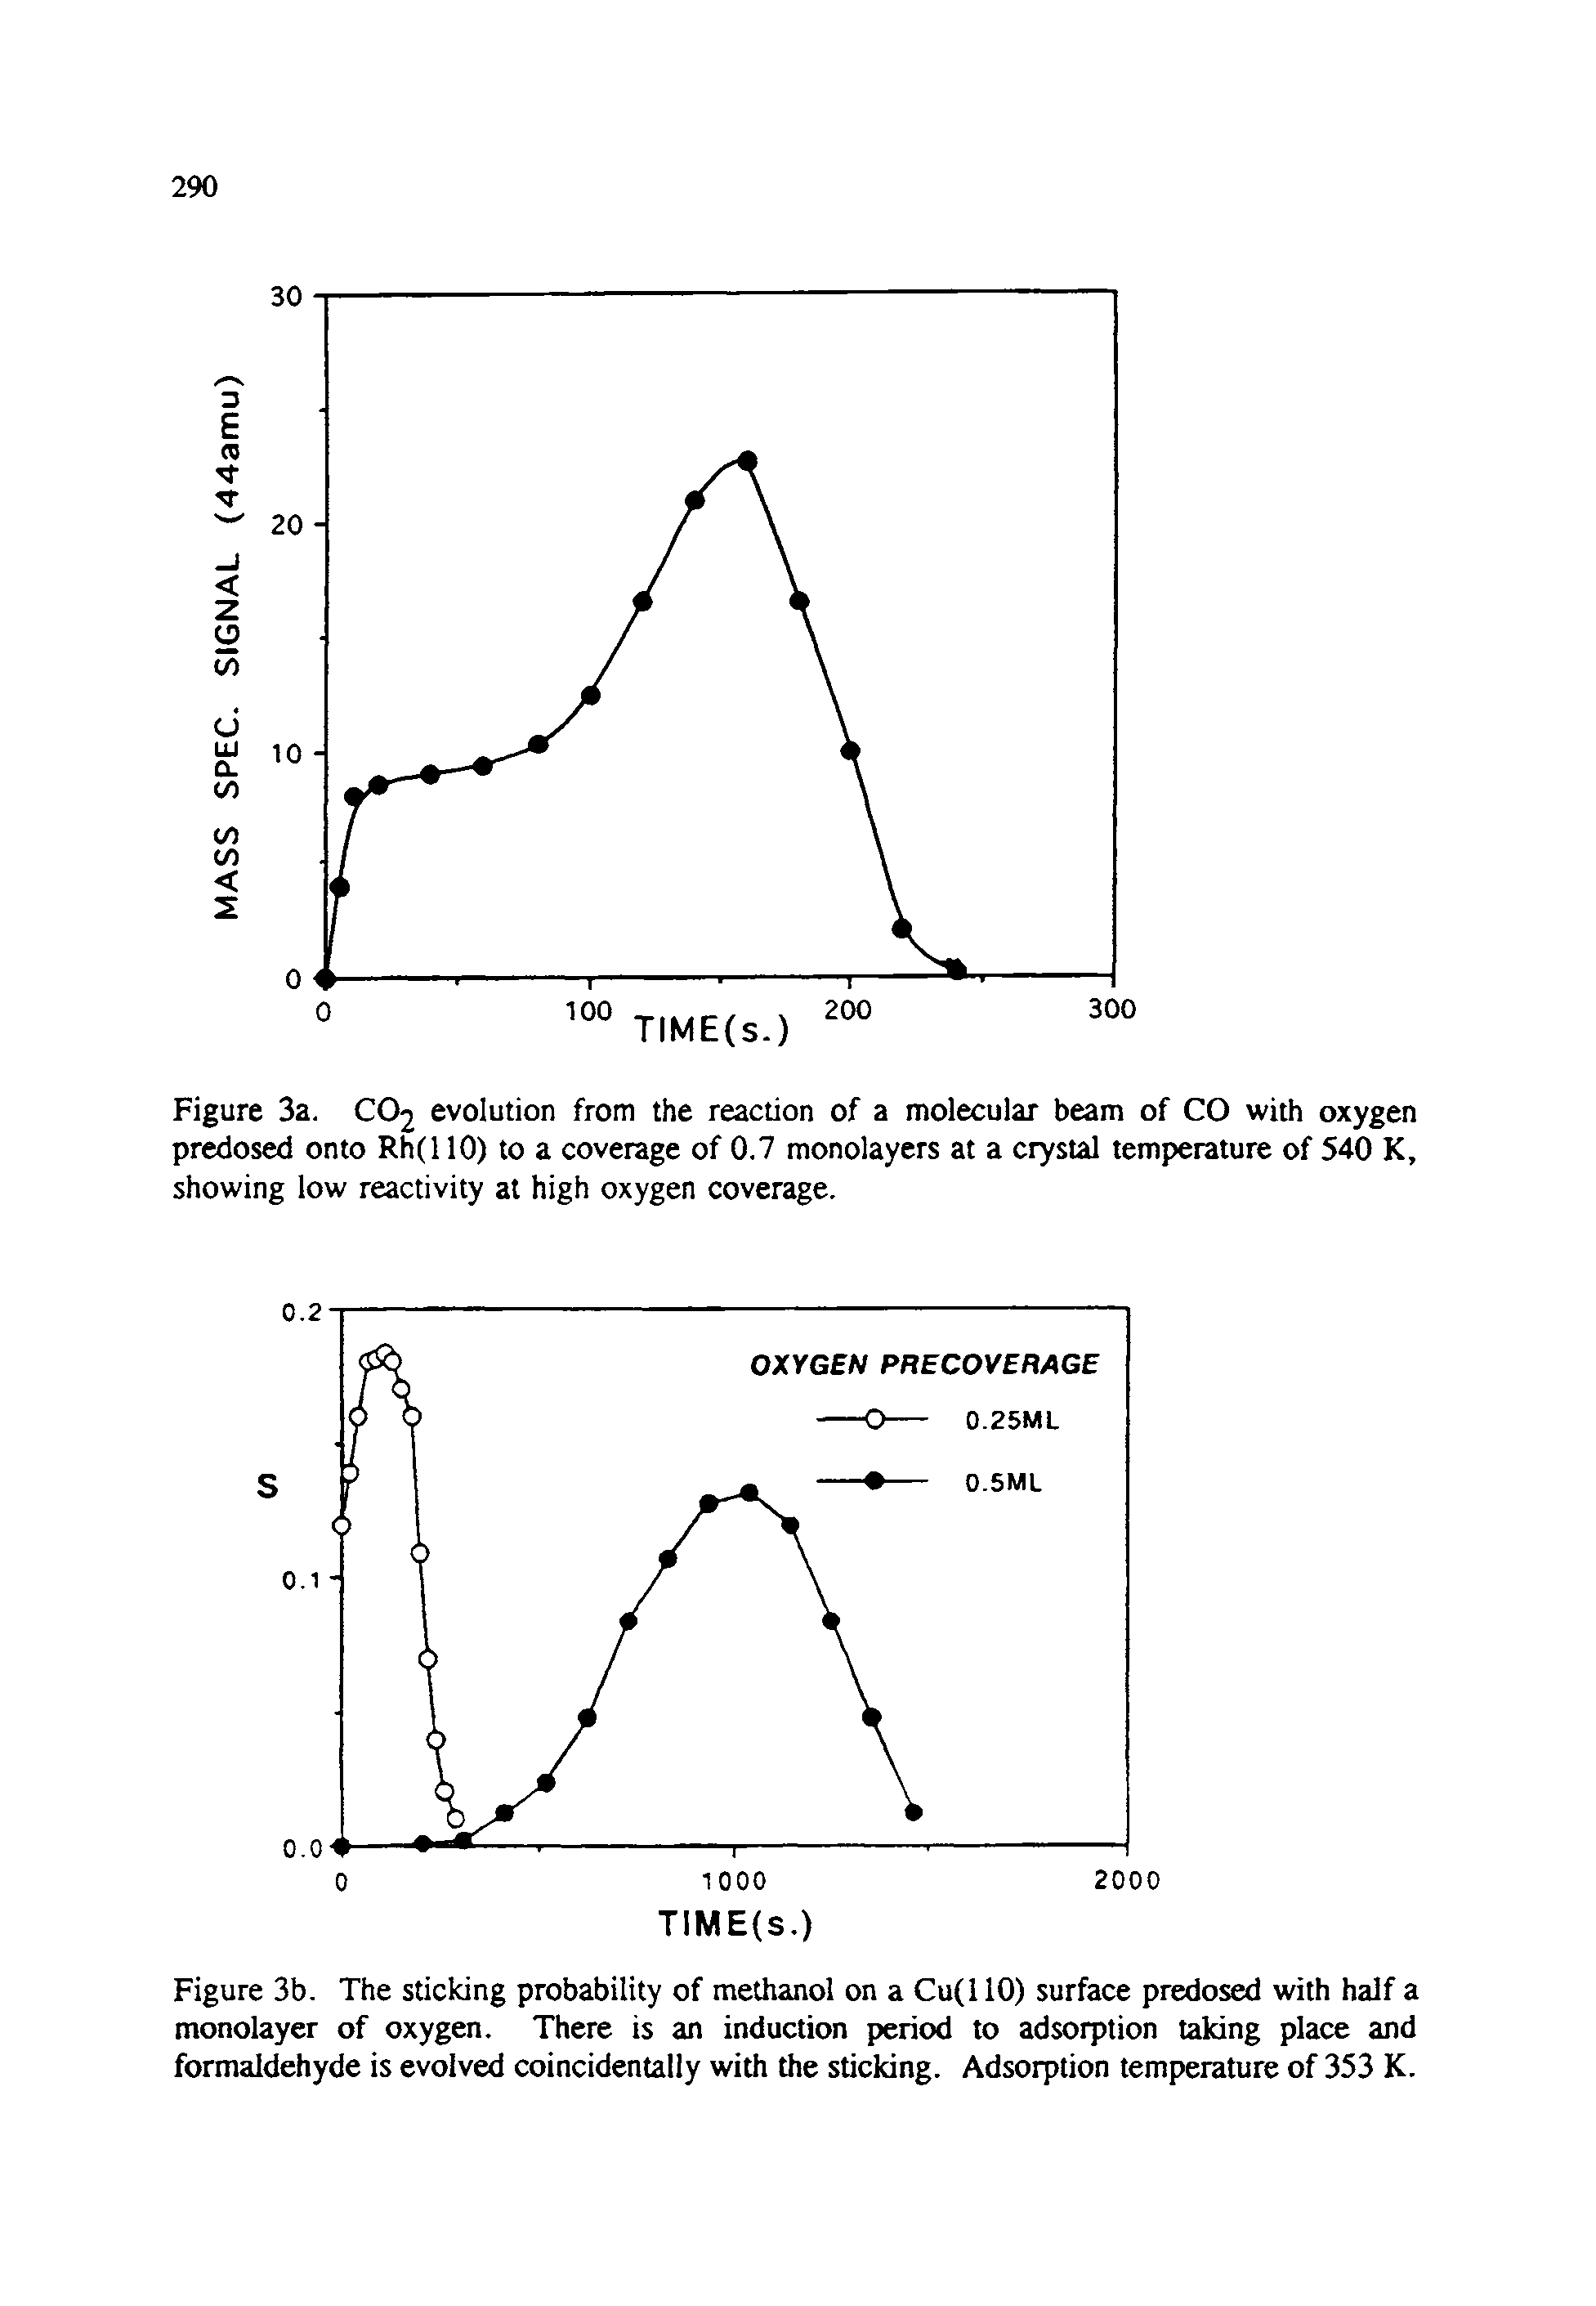 Figure 3b. The sticking probability of methanol on a Cu(llO) surface predosed with half a monolayer of oxygen. There is an induction period to adsorption taking place and formaldehyde is evolved coincidentally with the sticking. Adsorption temperature of 353 K.